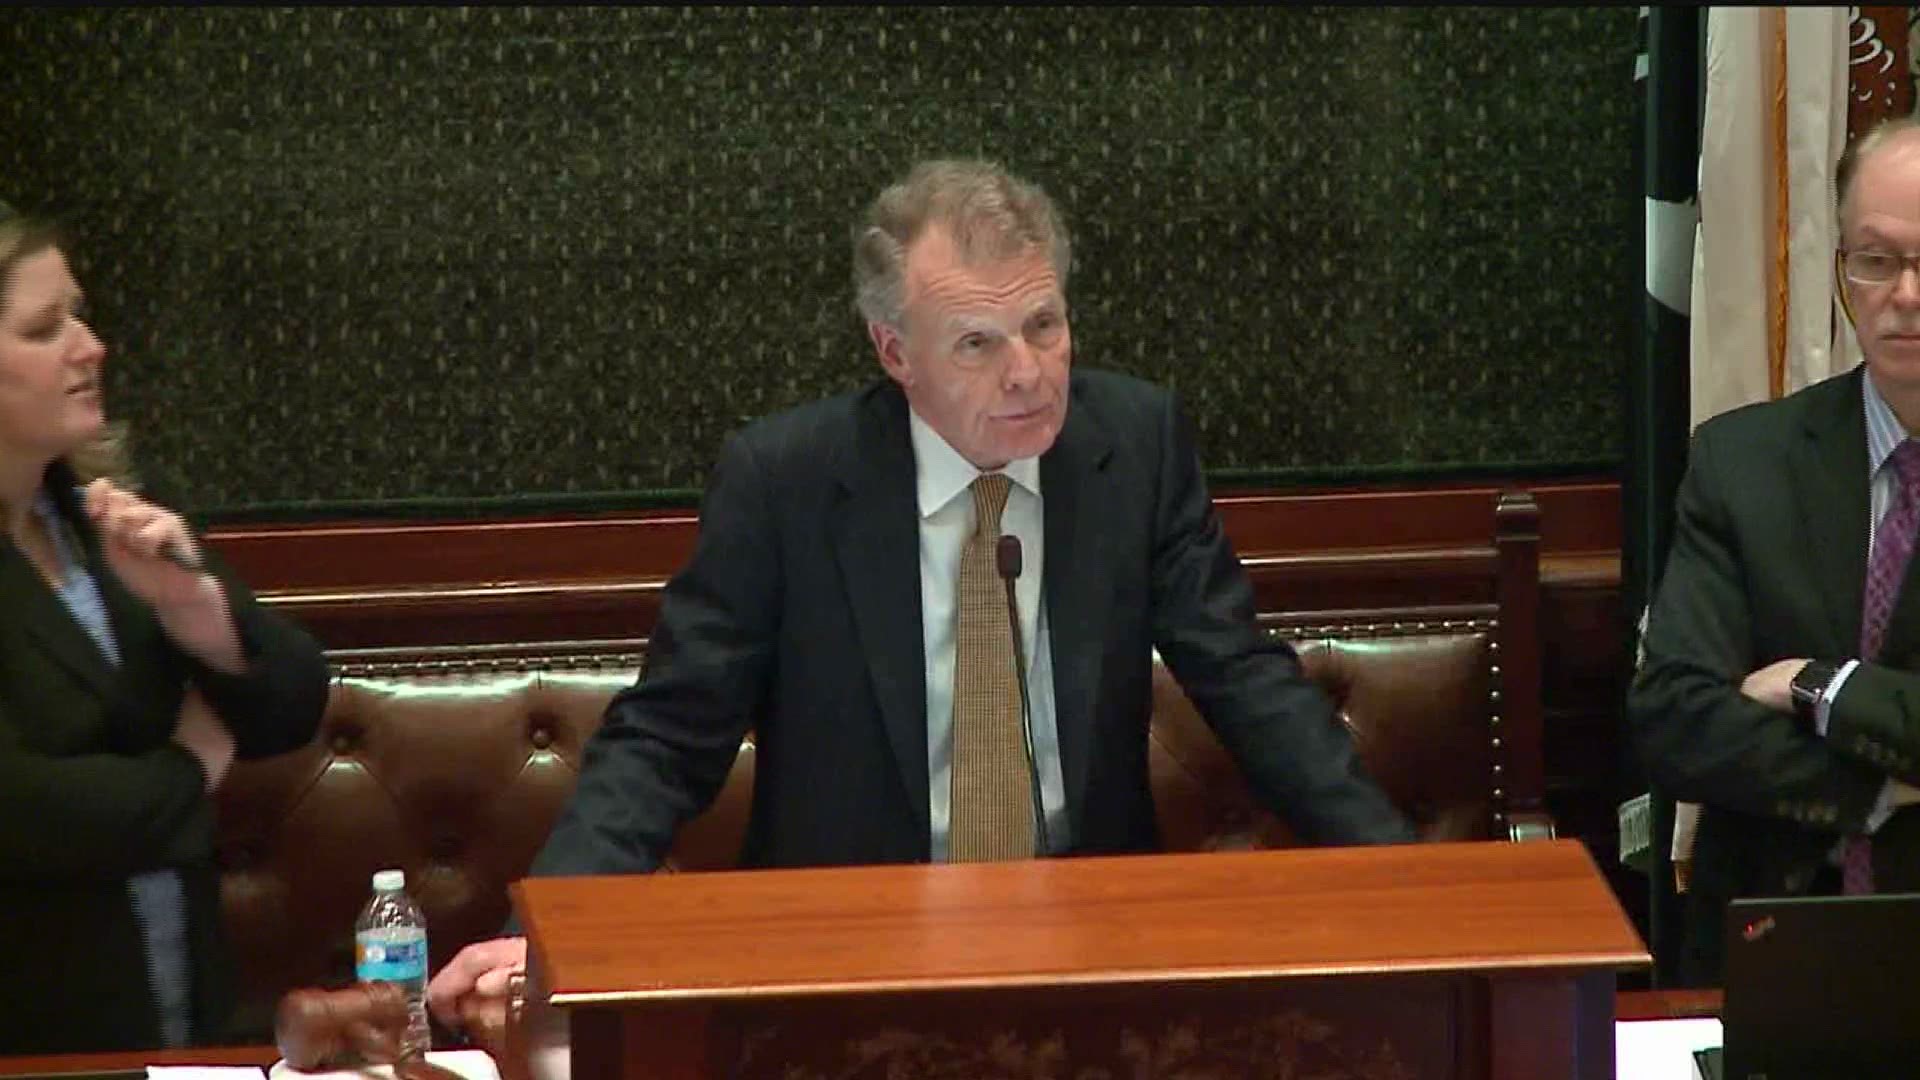 Members of the Illinois House progressive caucus say longtime House Speaker Michael Madigan must resign if allegations of a bribery scheme are true.